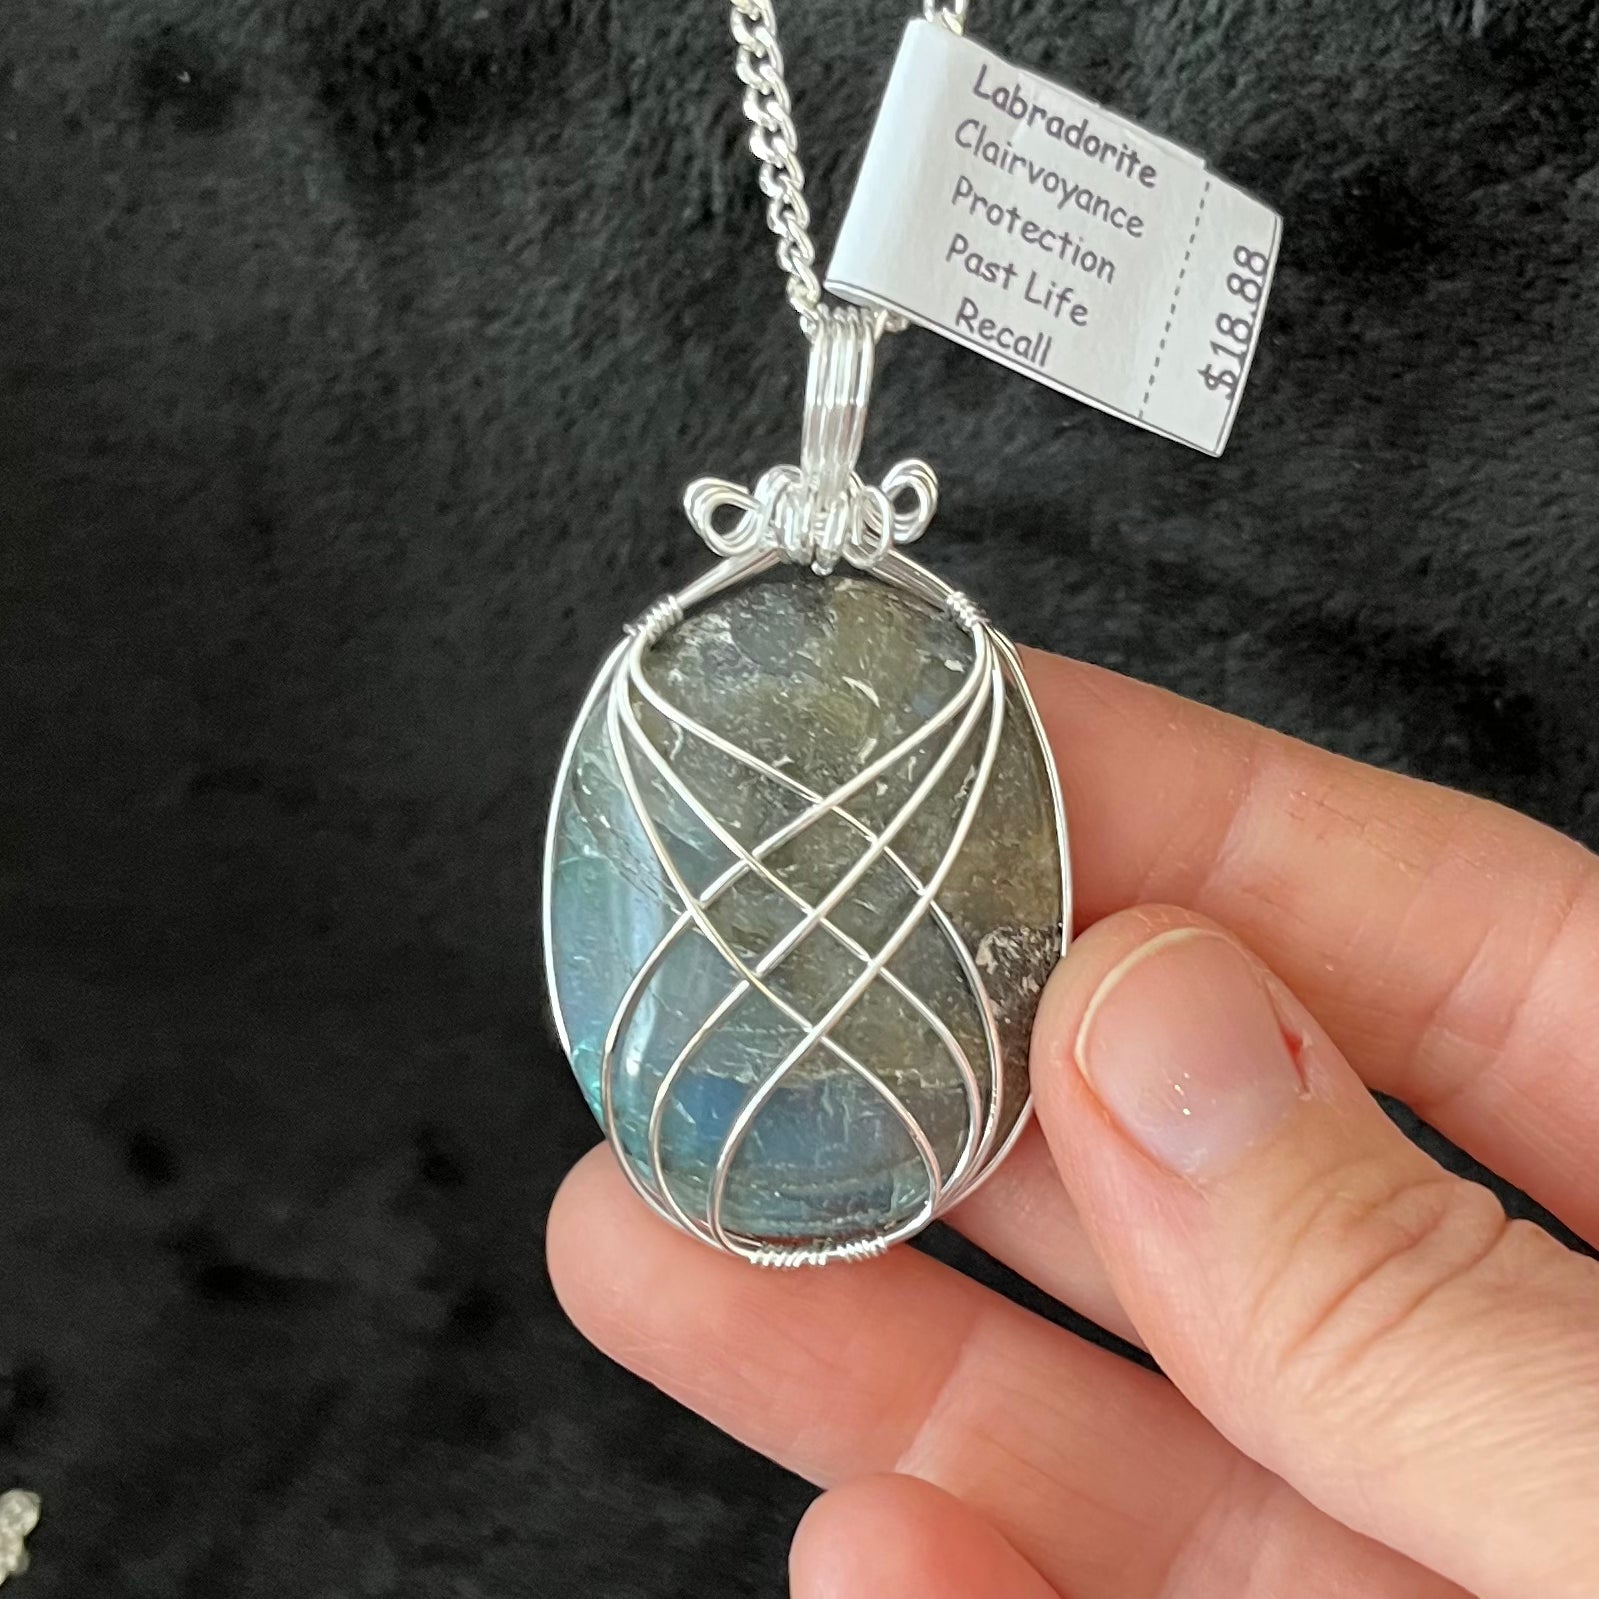 Fancy silver wire wrapped Labradorite Oval cabochon pendant, approximately 1 3/4" long, attatched to a silver chain